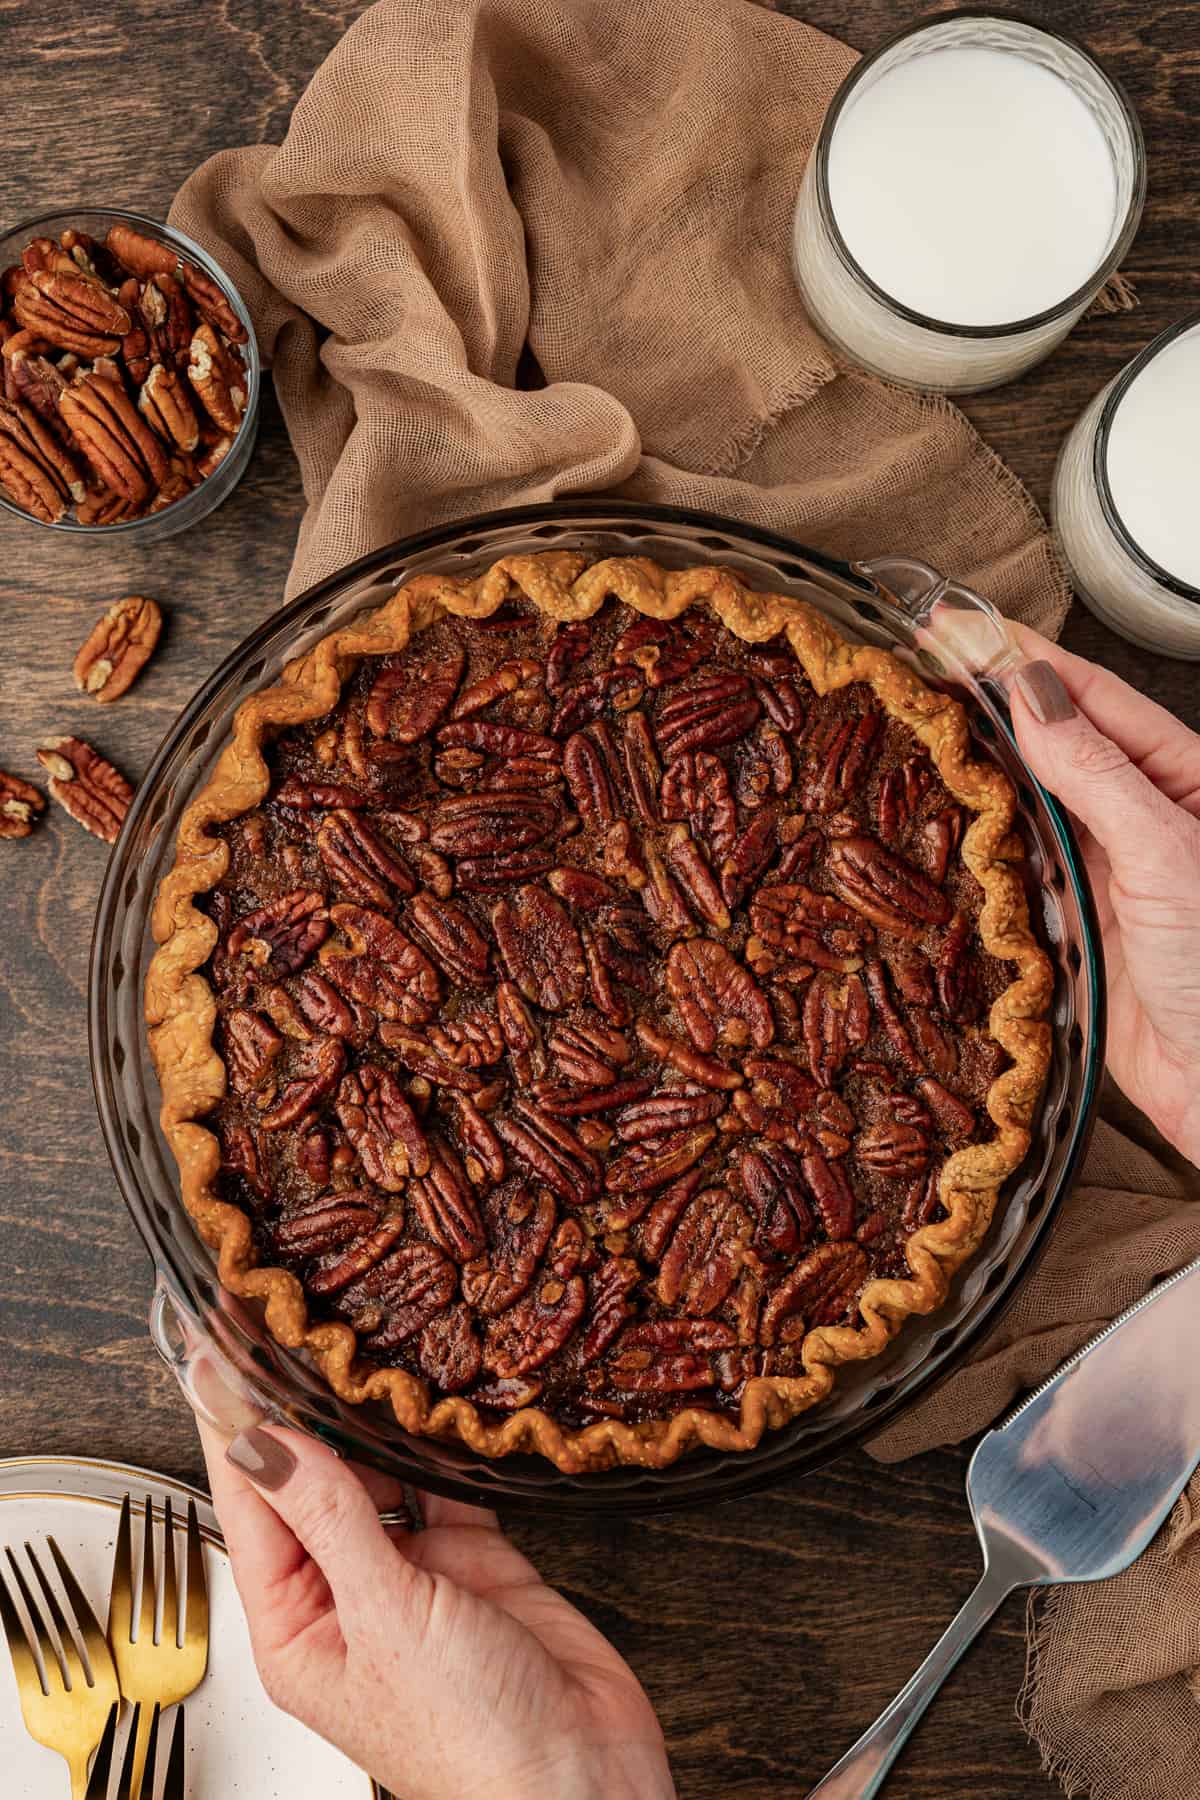 a whole pecan pie being placed on a wood surface with two hands, on top of a tan towel and surrounded by two glasses of milk, a small dish of pecans, more pecans scattered around, a stack of plates and forks and a pie serving spatula